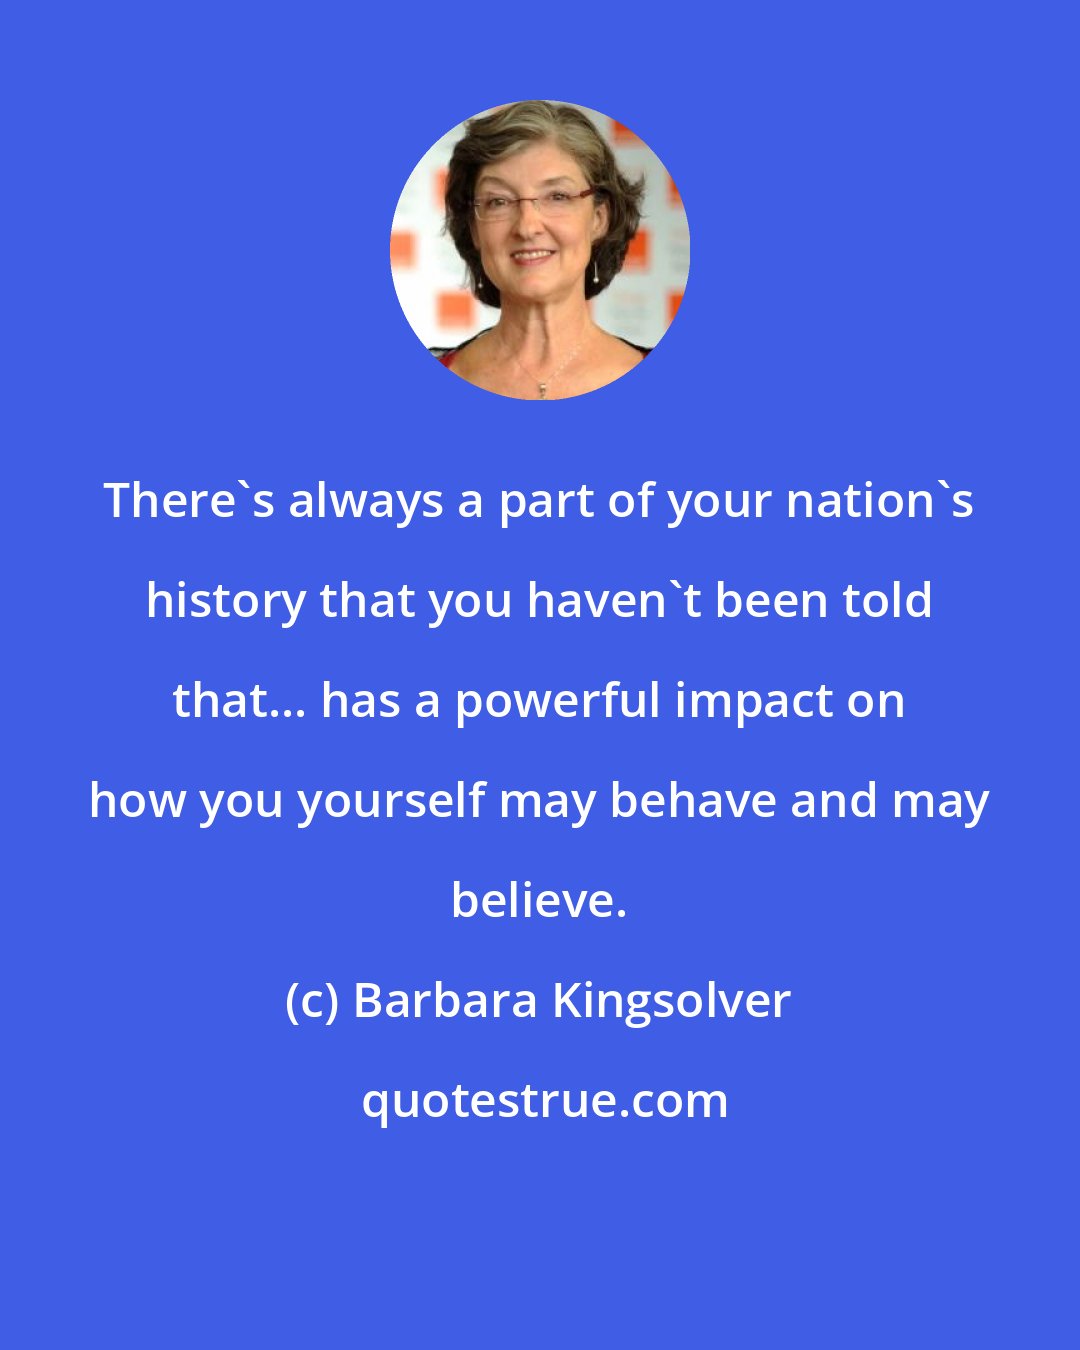 Barbara Kingsolver: There's always a part of your nation's history that you haven't been told that... has a powerful impact on how you yourself may behave and may believe.